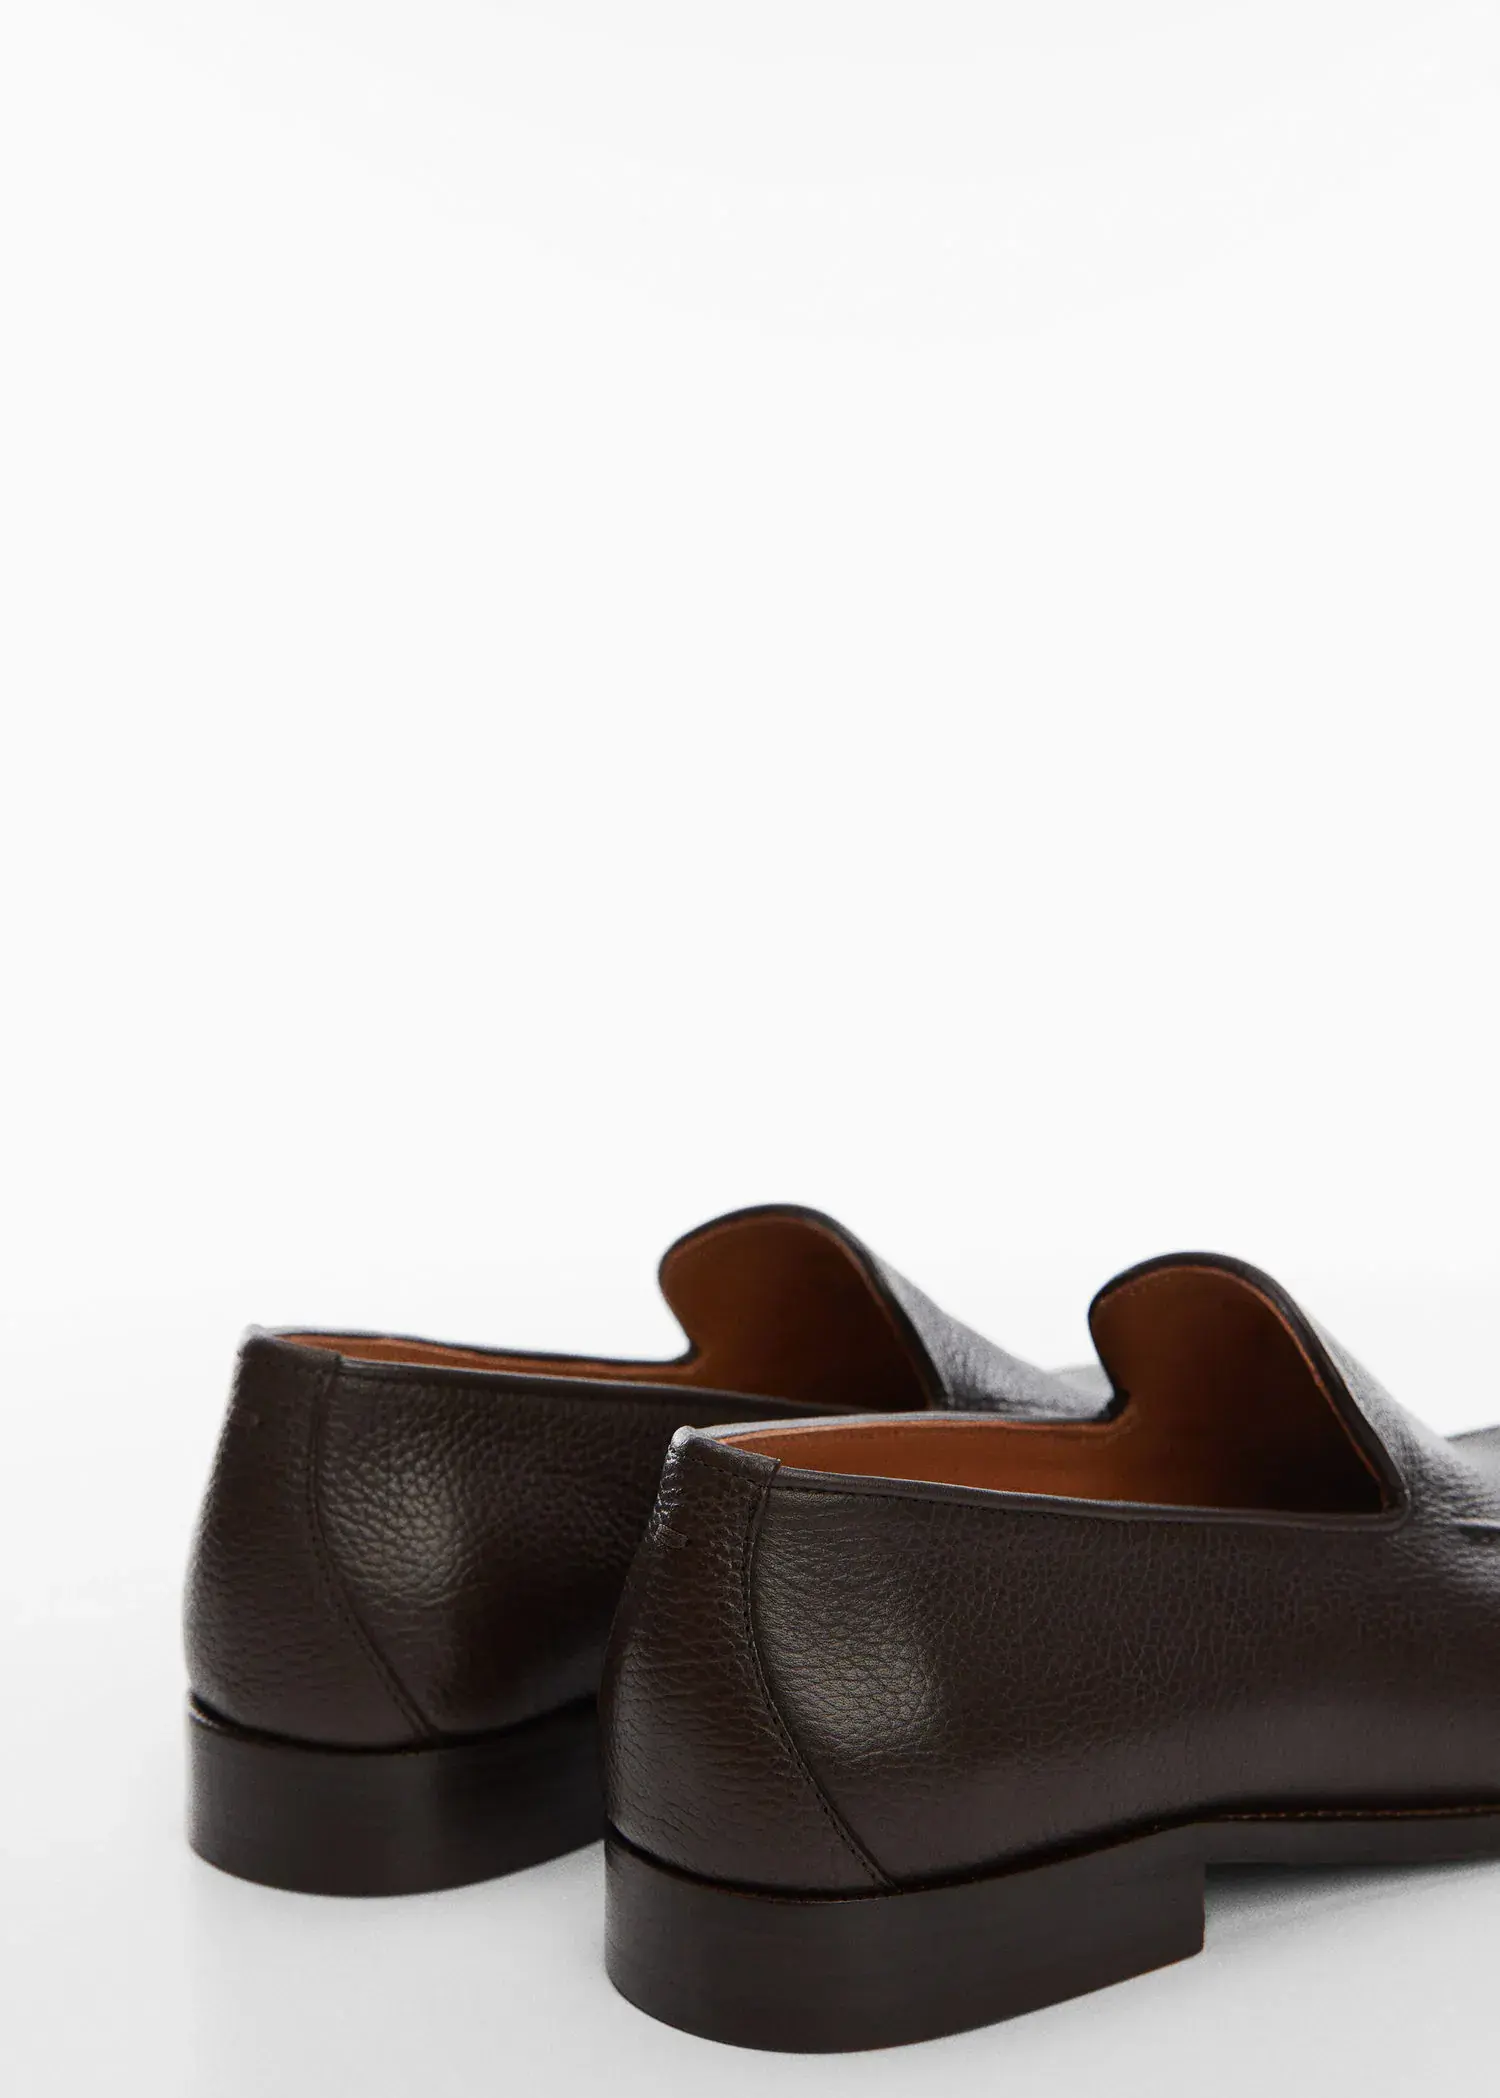 Mango Minimalist leather moccasins. a close up of a pair of brown shoes. 